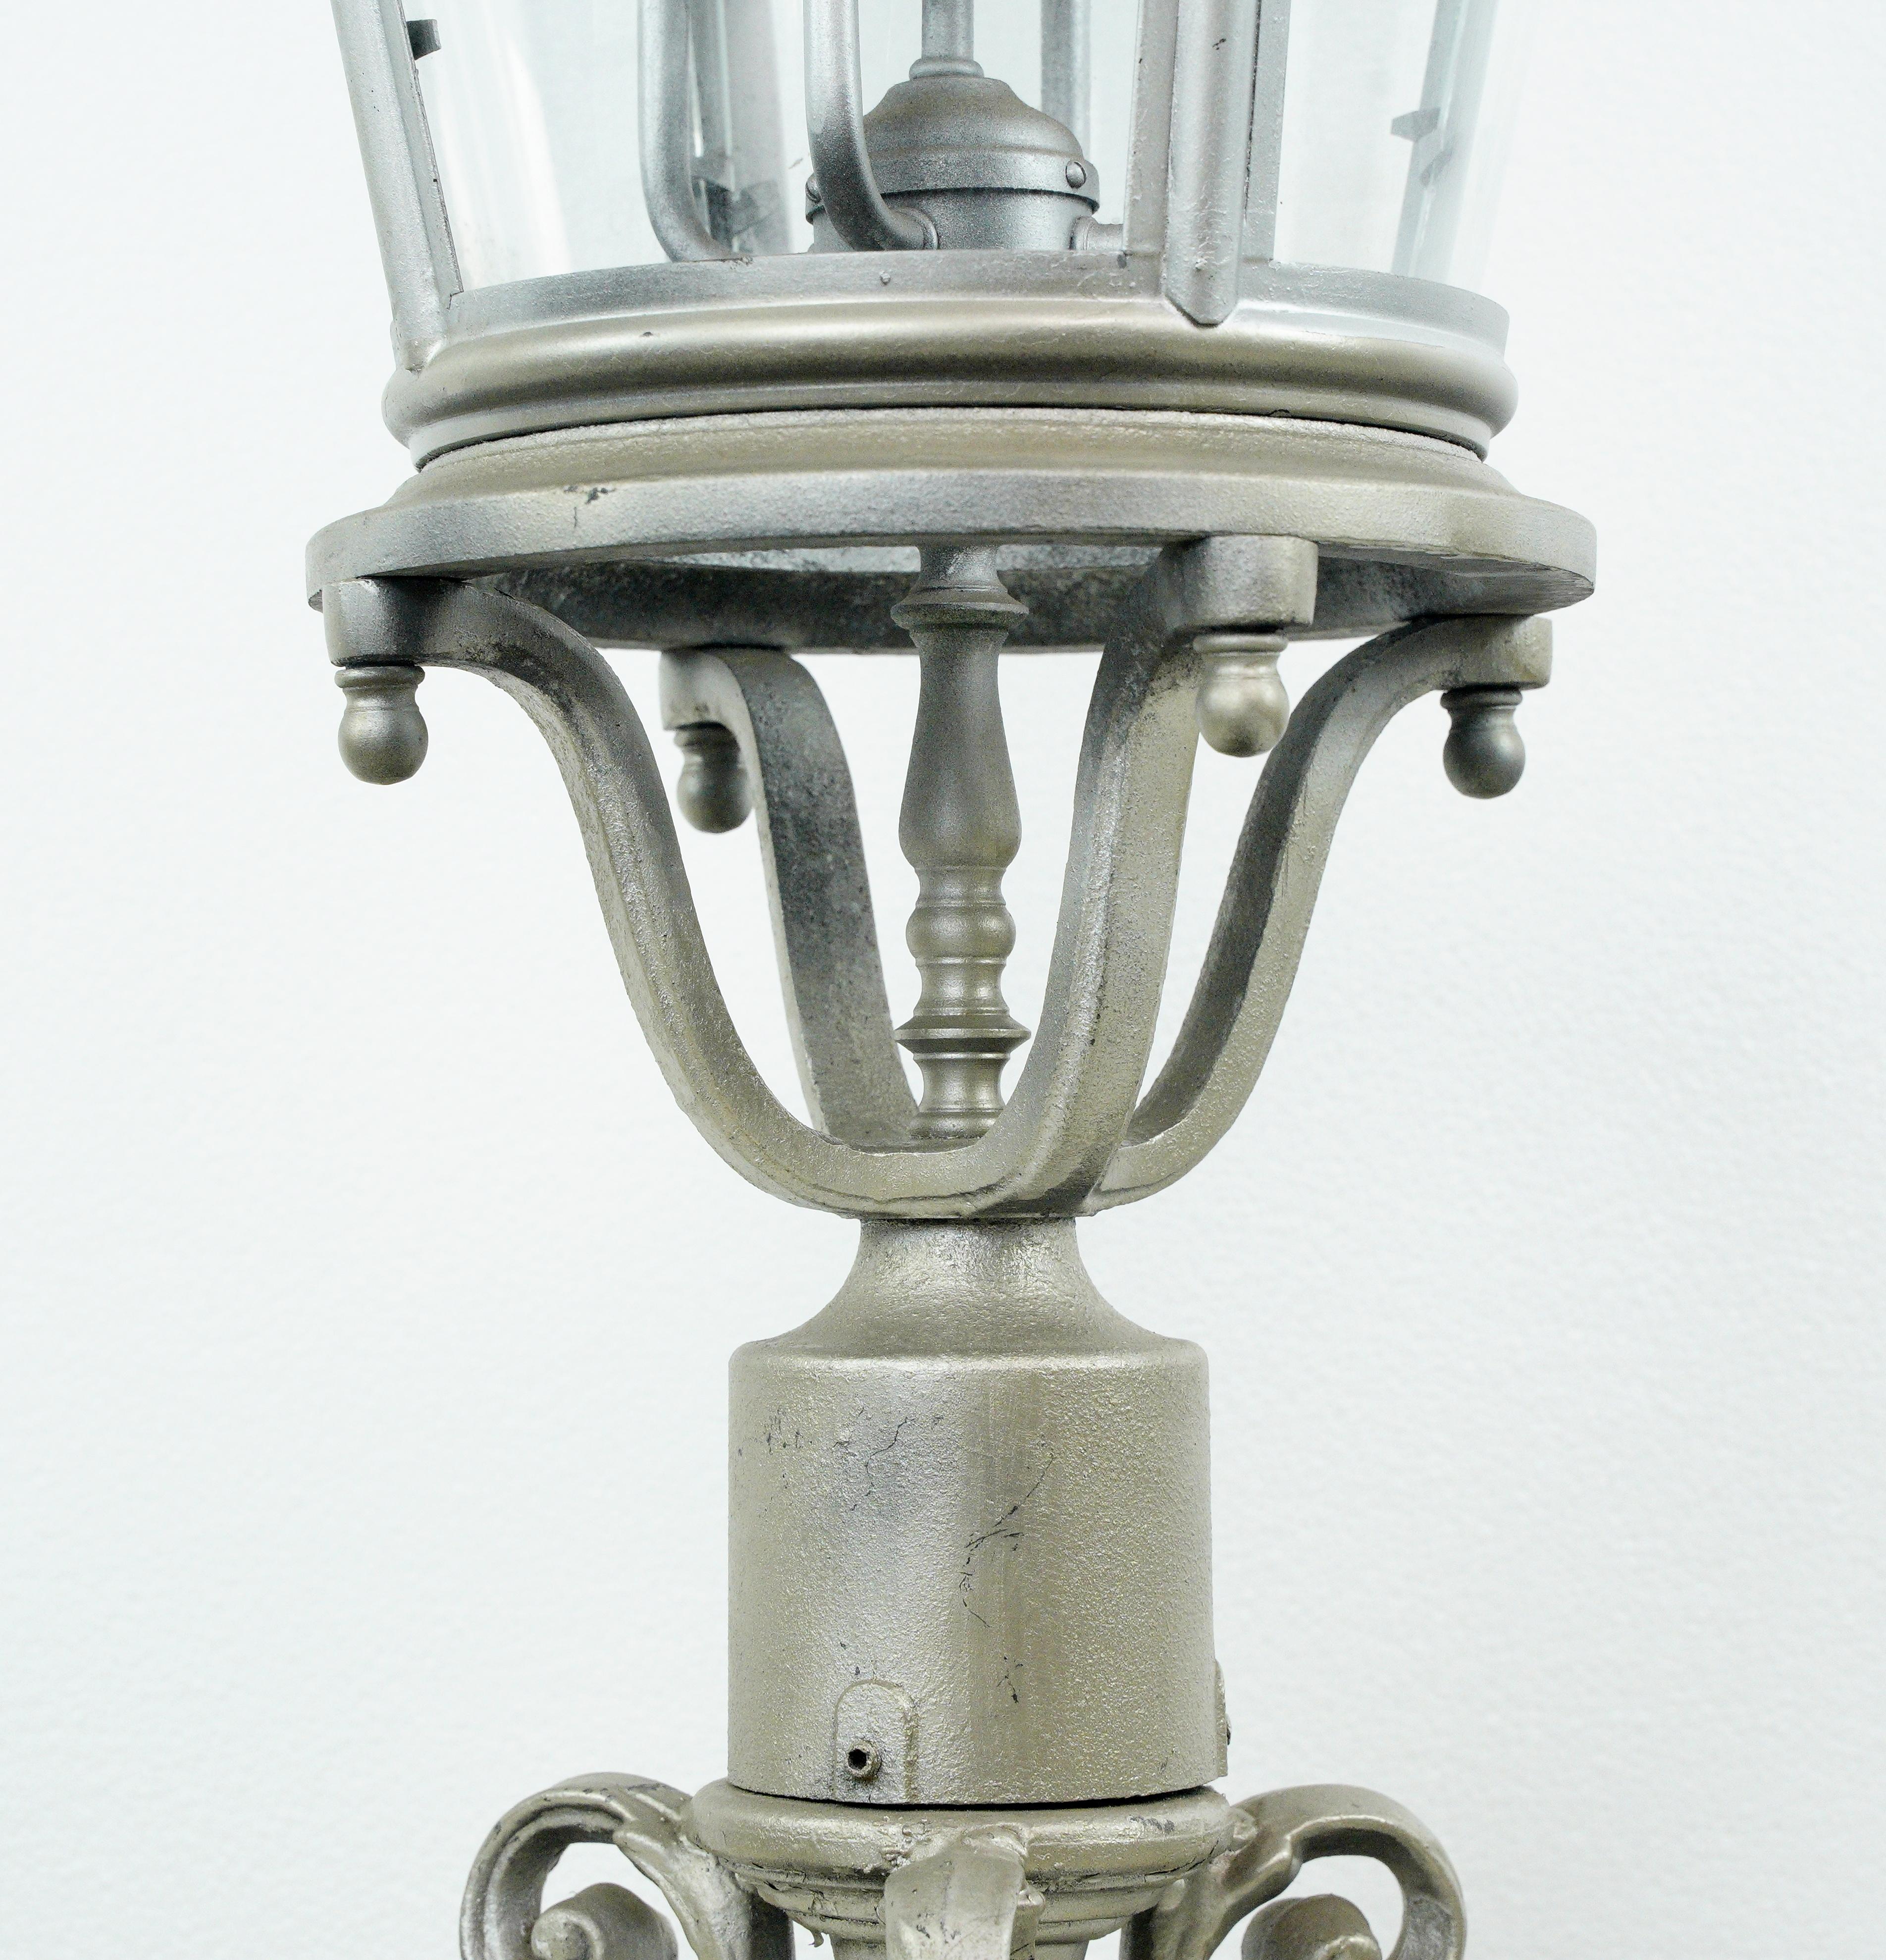 This antique aluminum column or post lantern light is a stunning outdoor fixture with a decorative scroll design at the base, distressed silver paint, and five glass enclosed candelabra arm lights. It combines old world charm with durability,